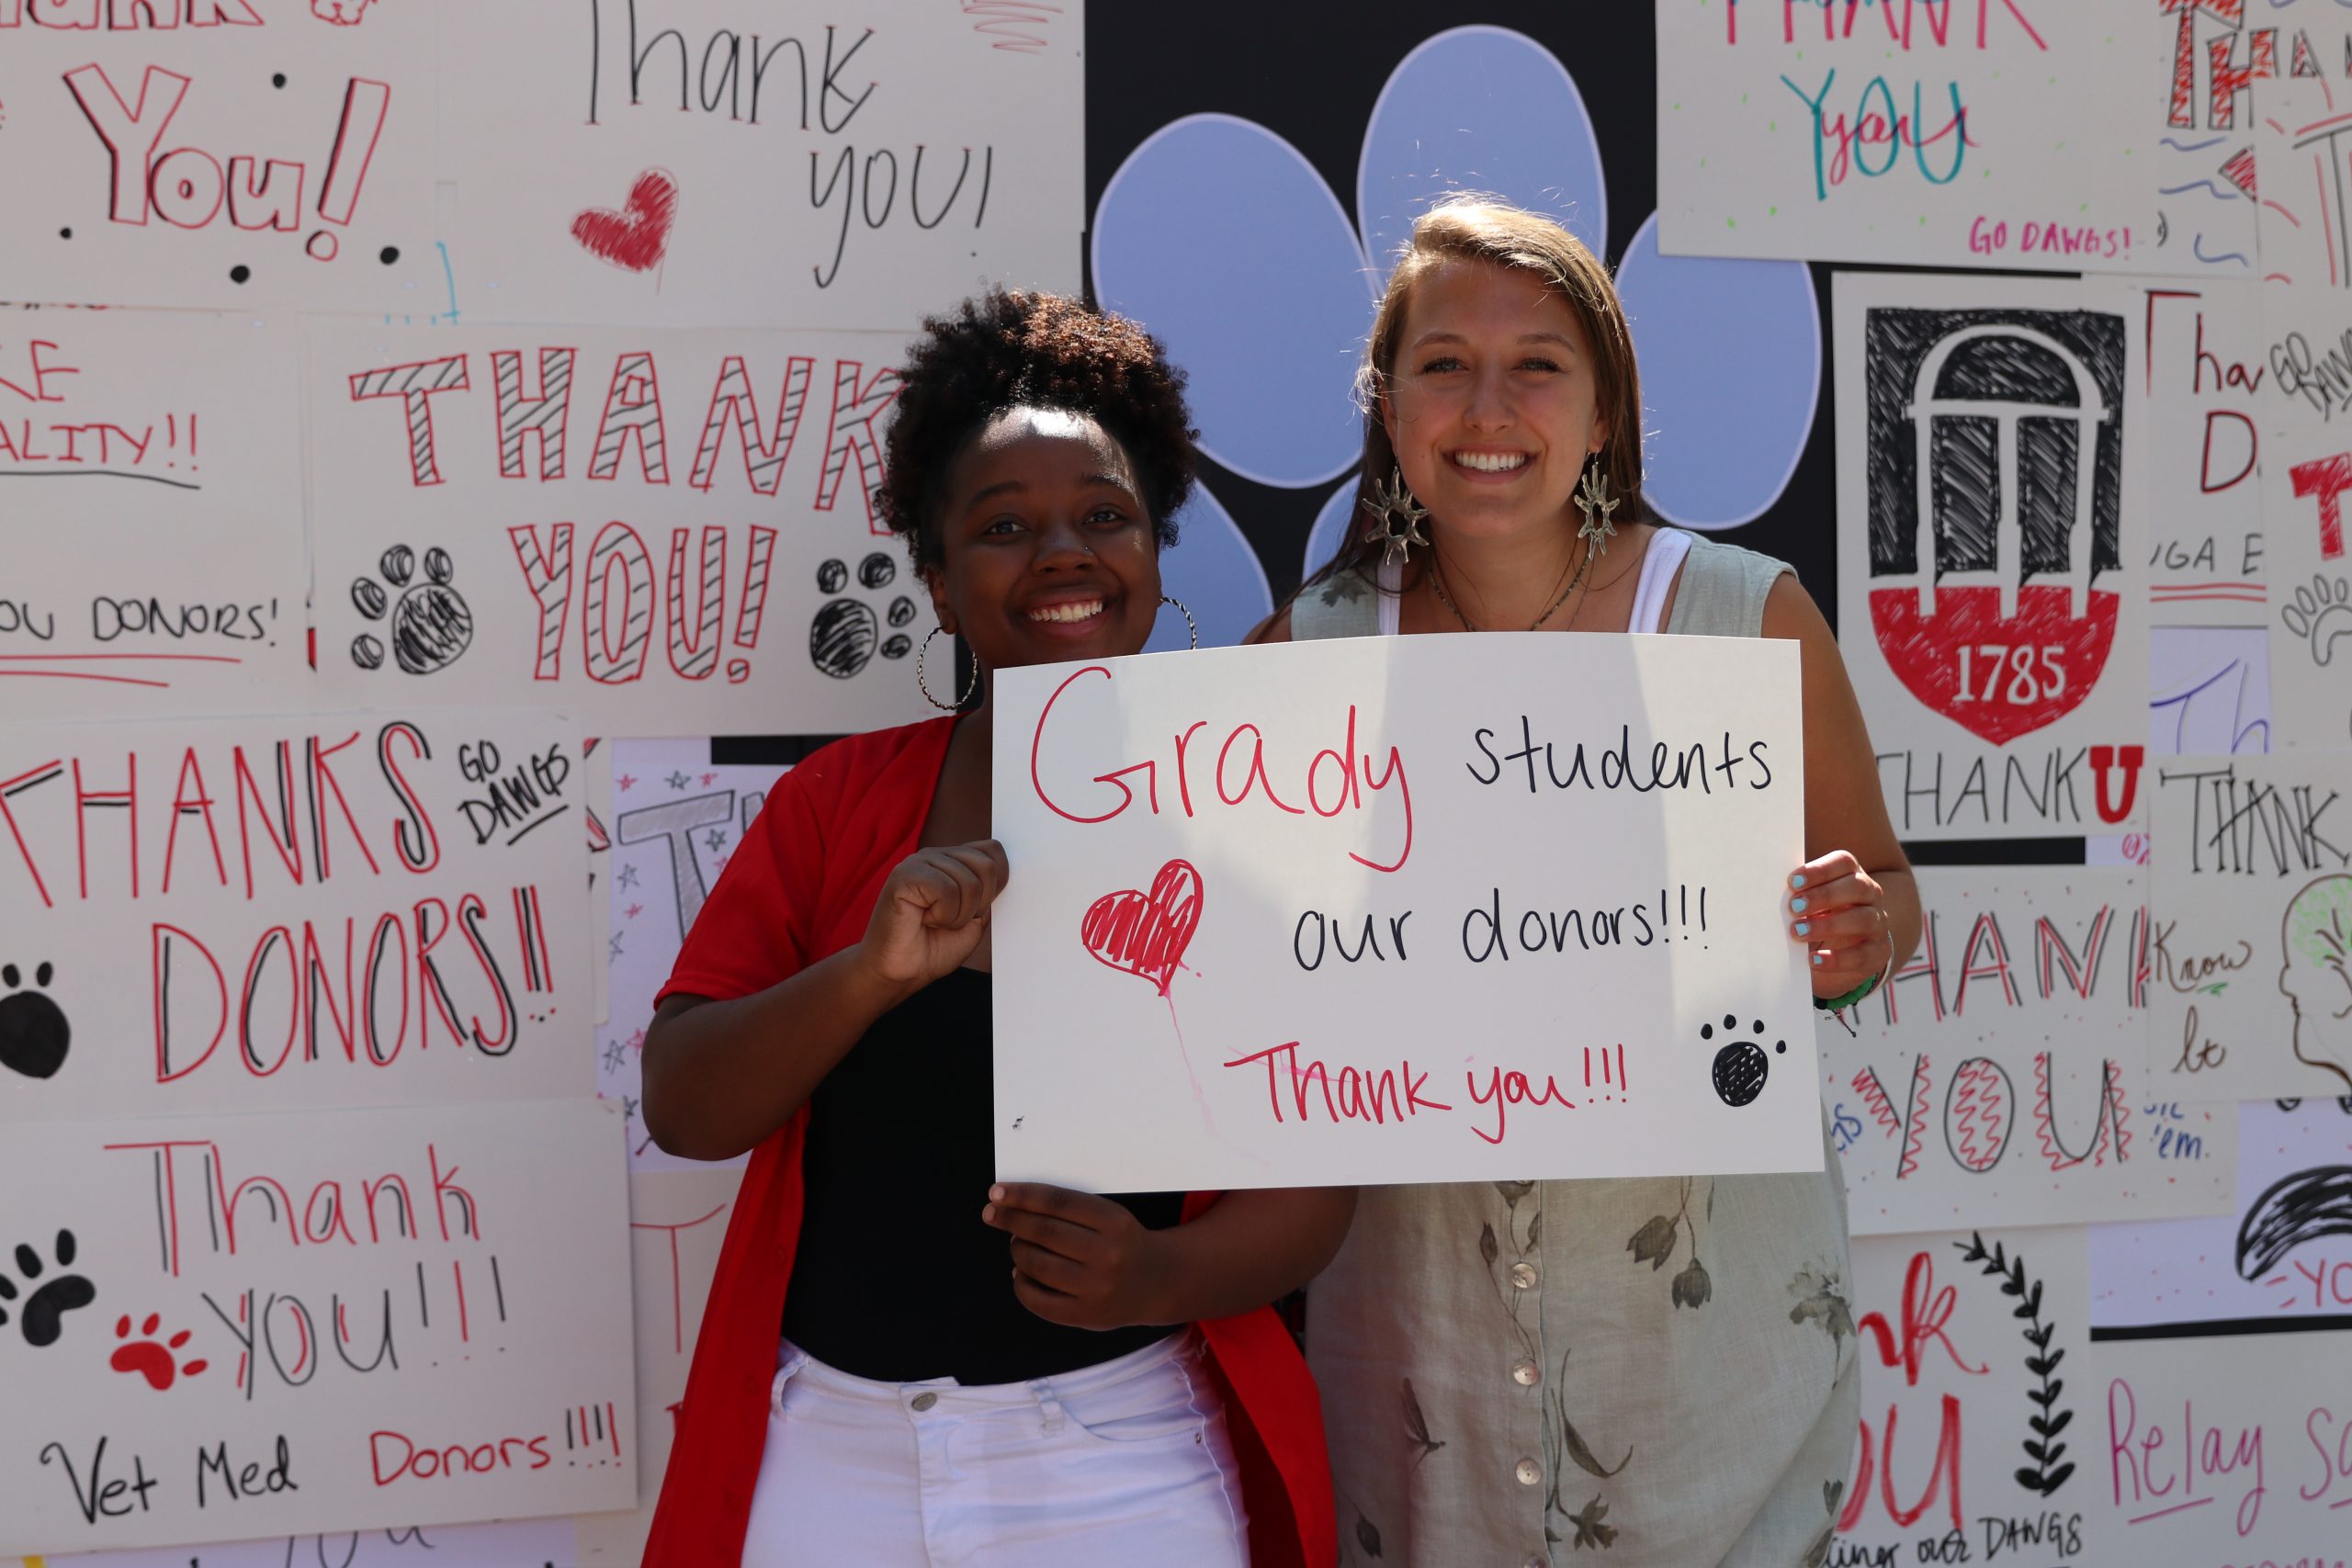 Students hold a sign thanking Grady College donors.